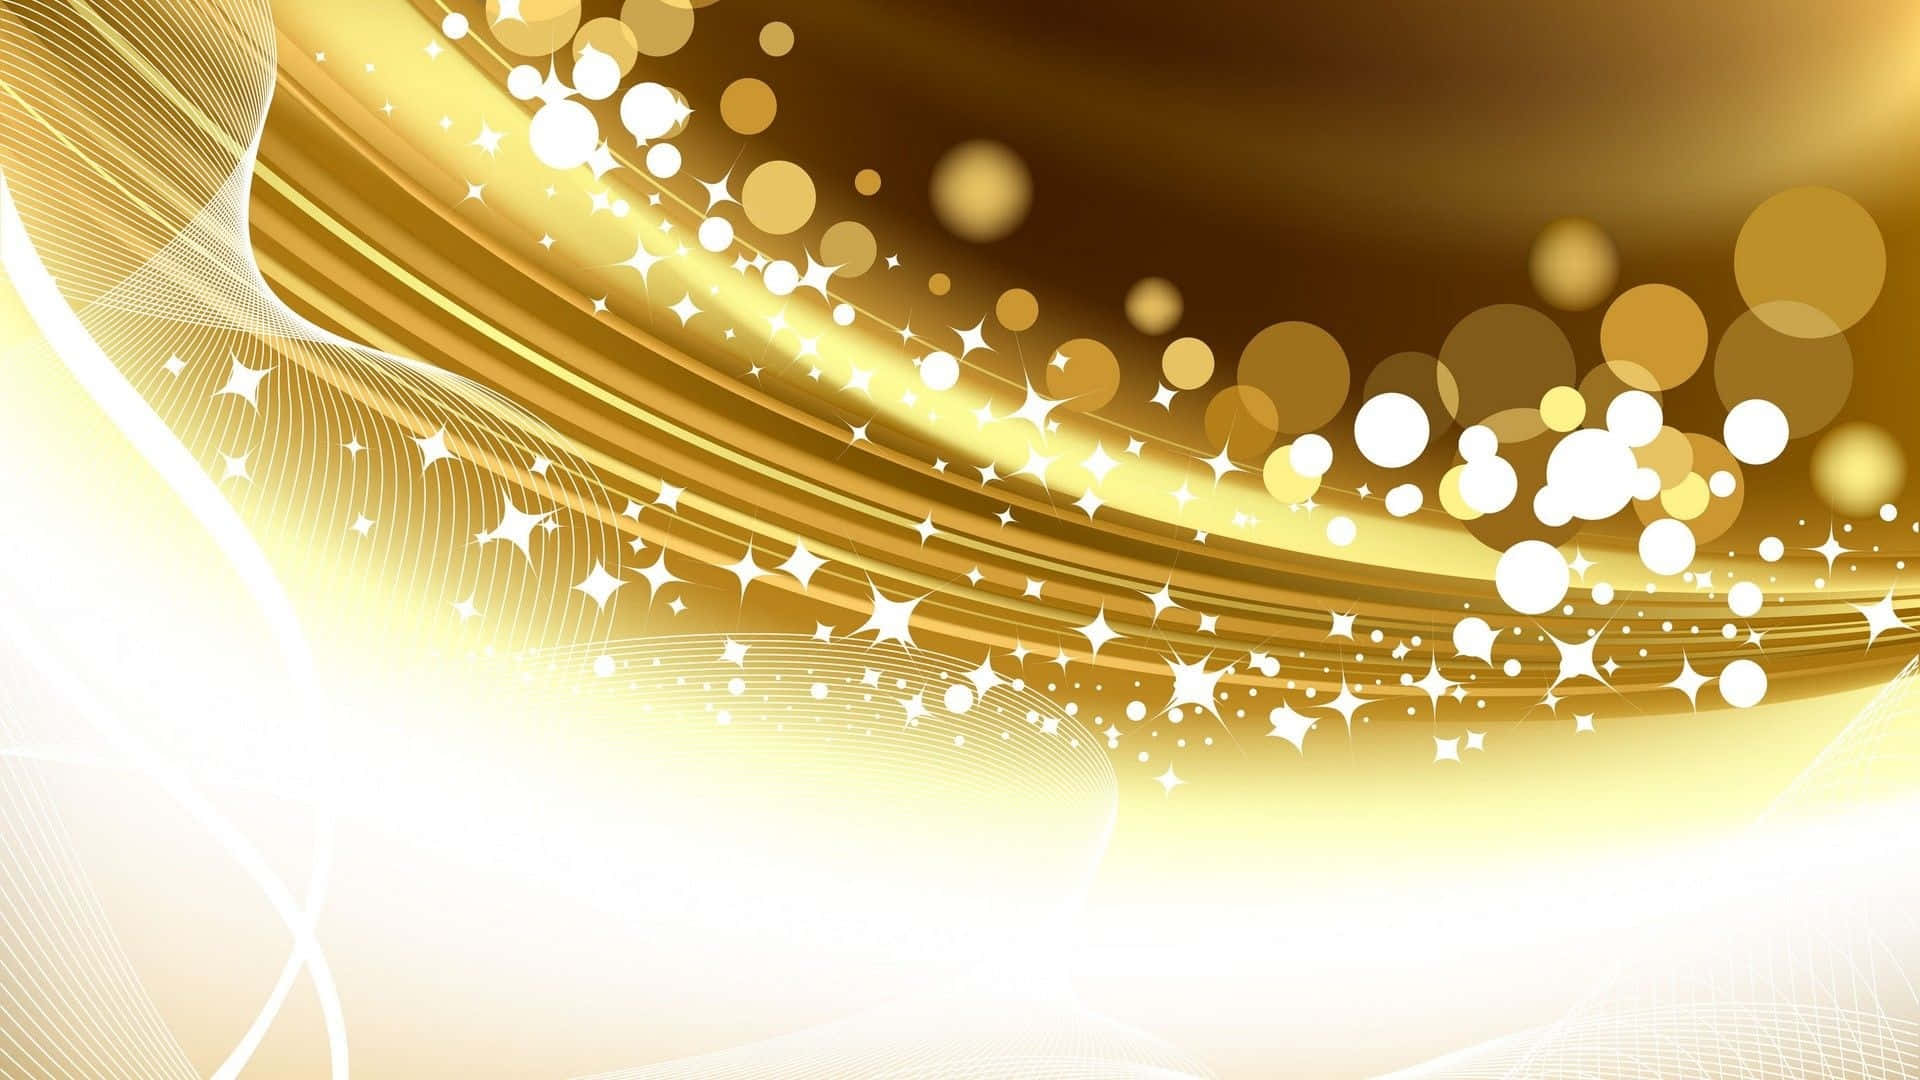 Golden Background With Stars And Swirls